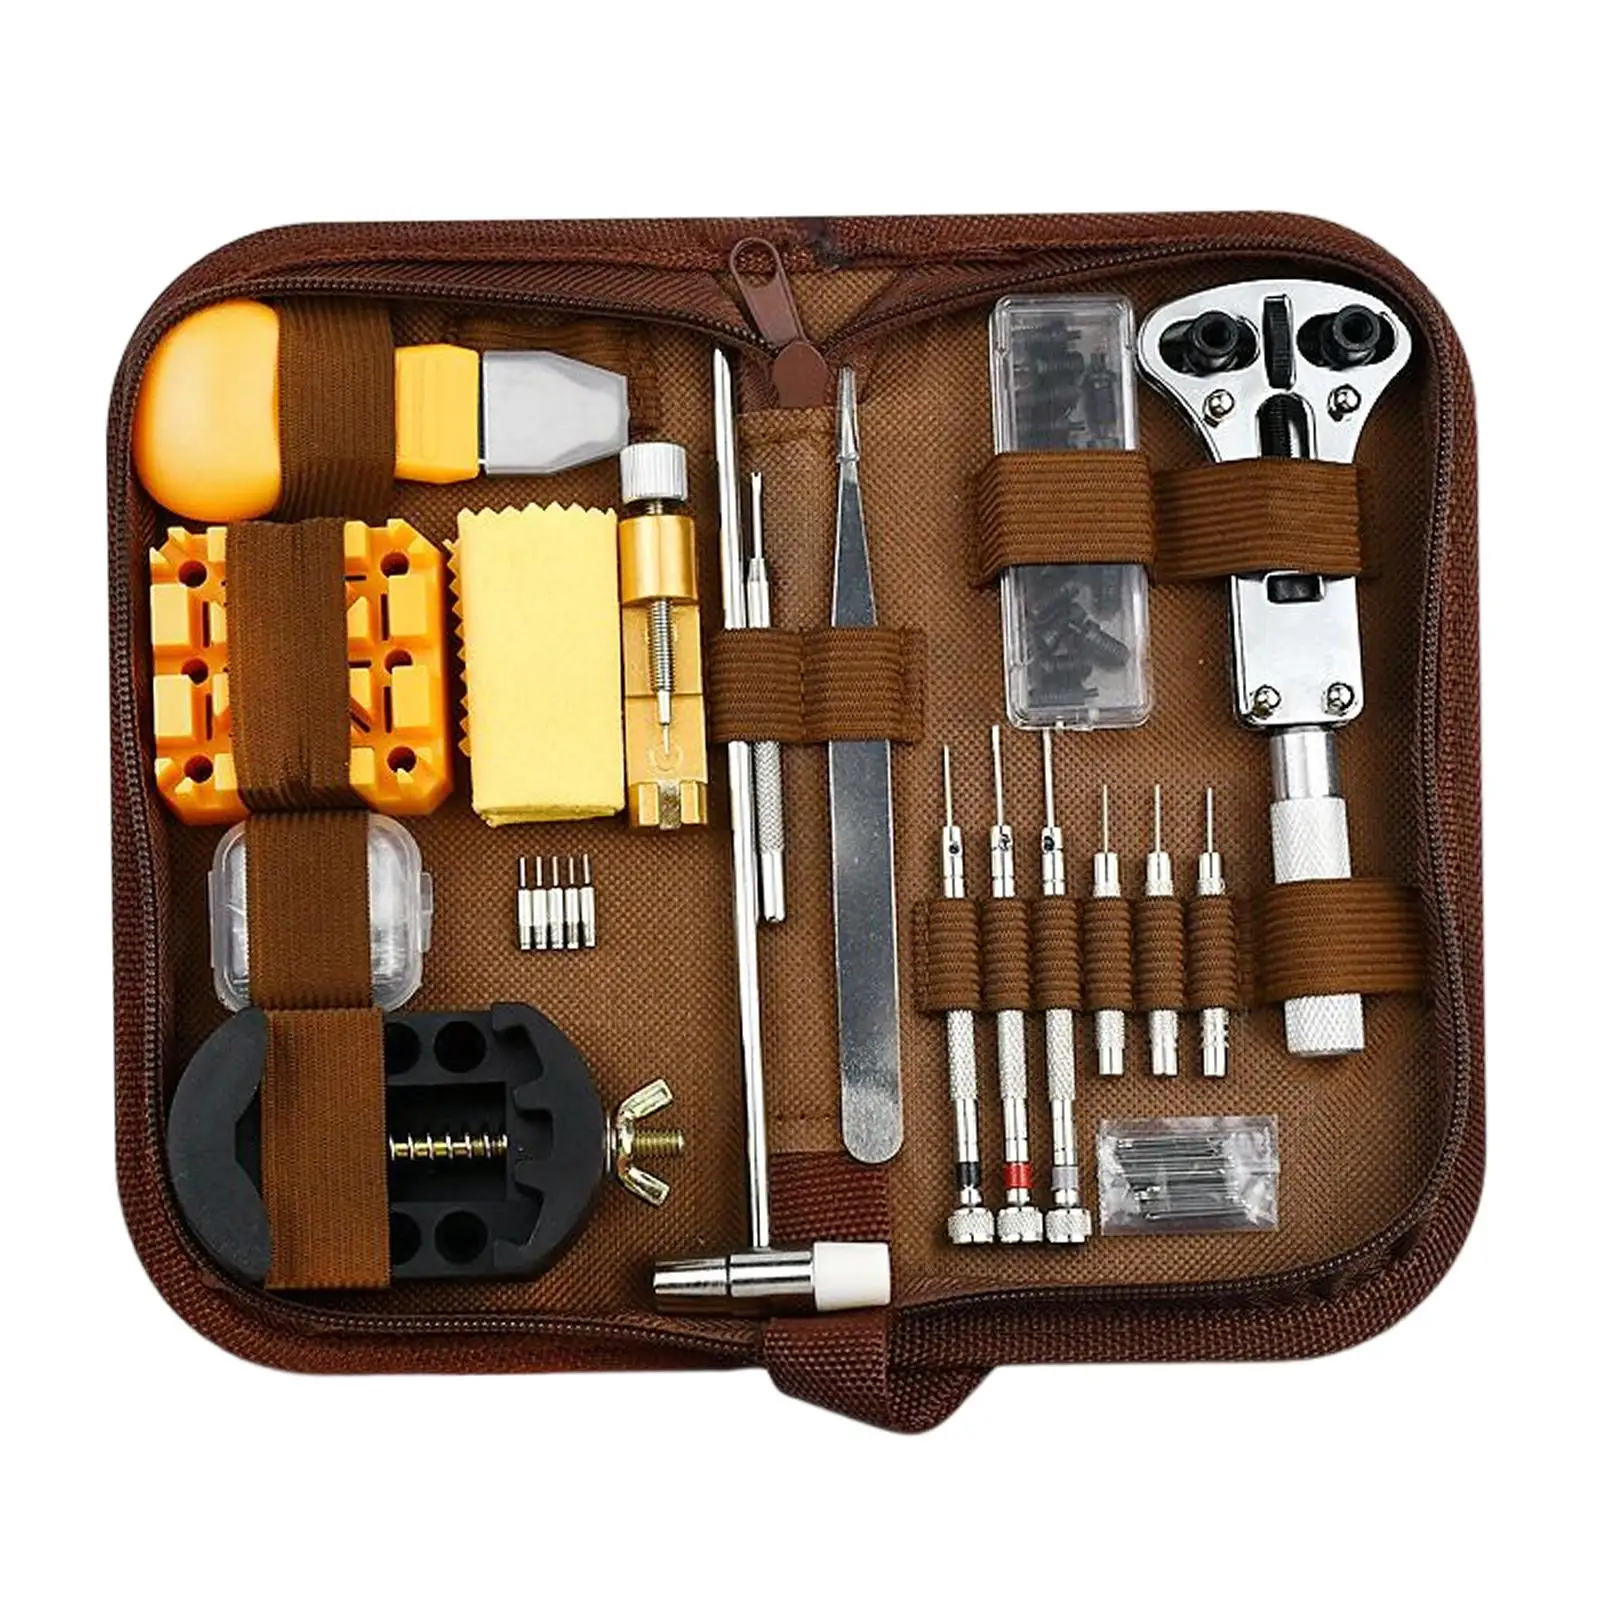 168x Watch Repair Tool Kit Spring Bar Carrying Case Extra Pins Watch Link Removal Tool Back Removal Watch Battery Replacement